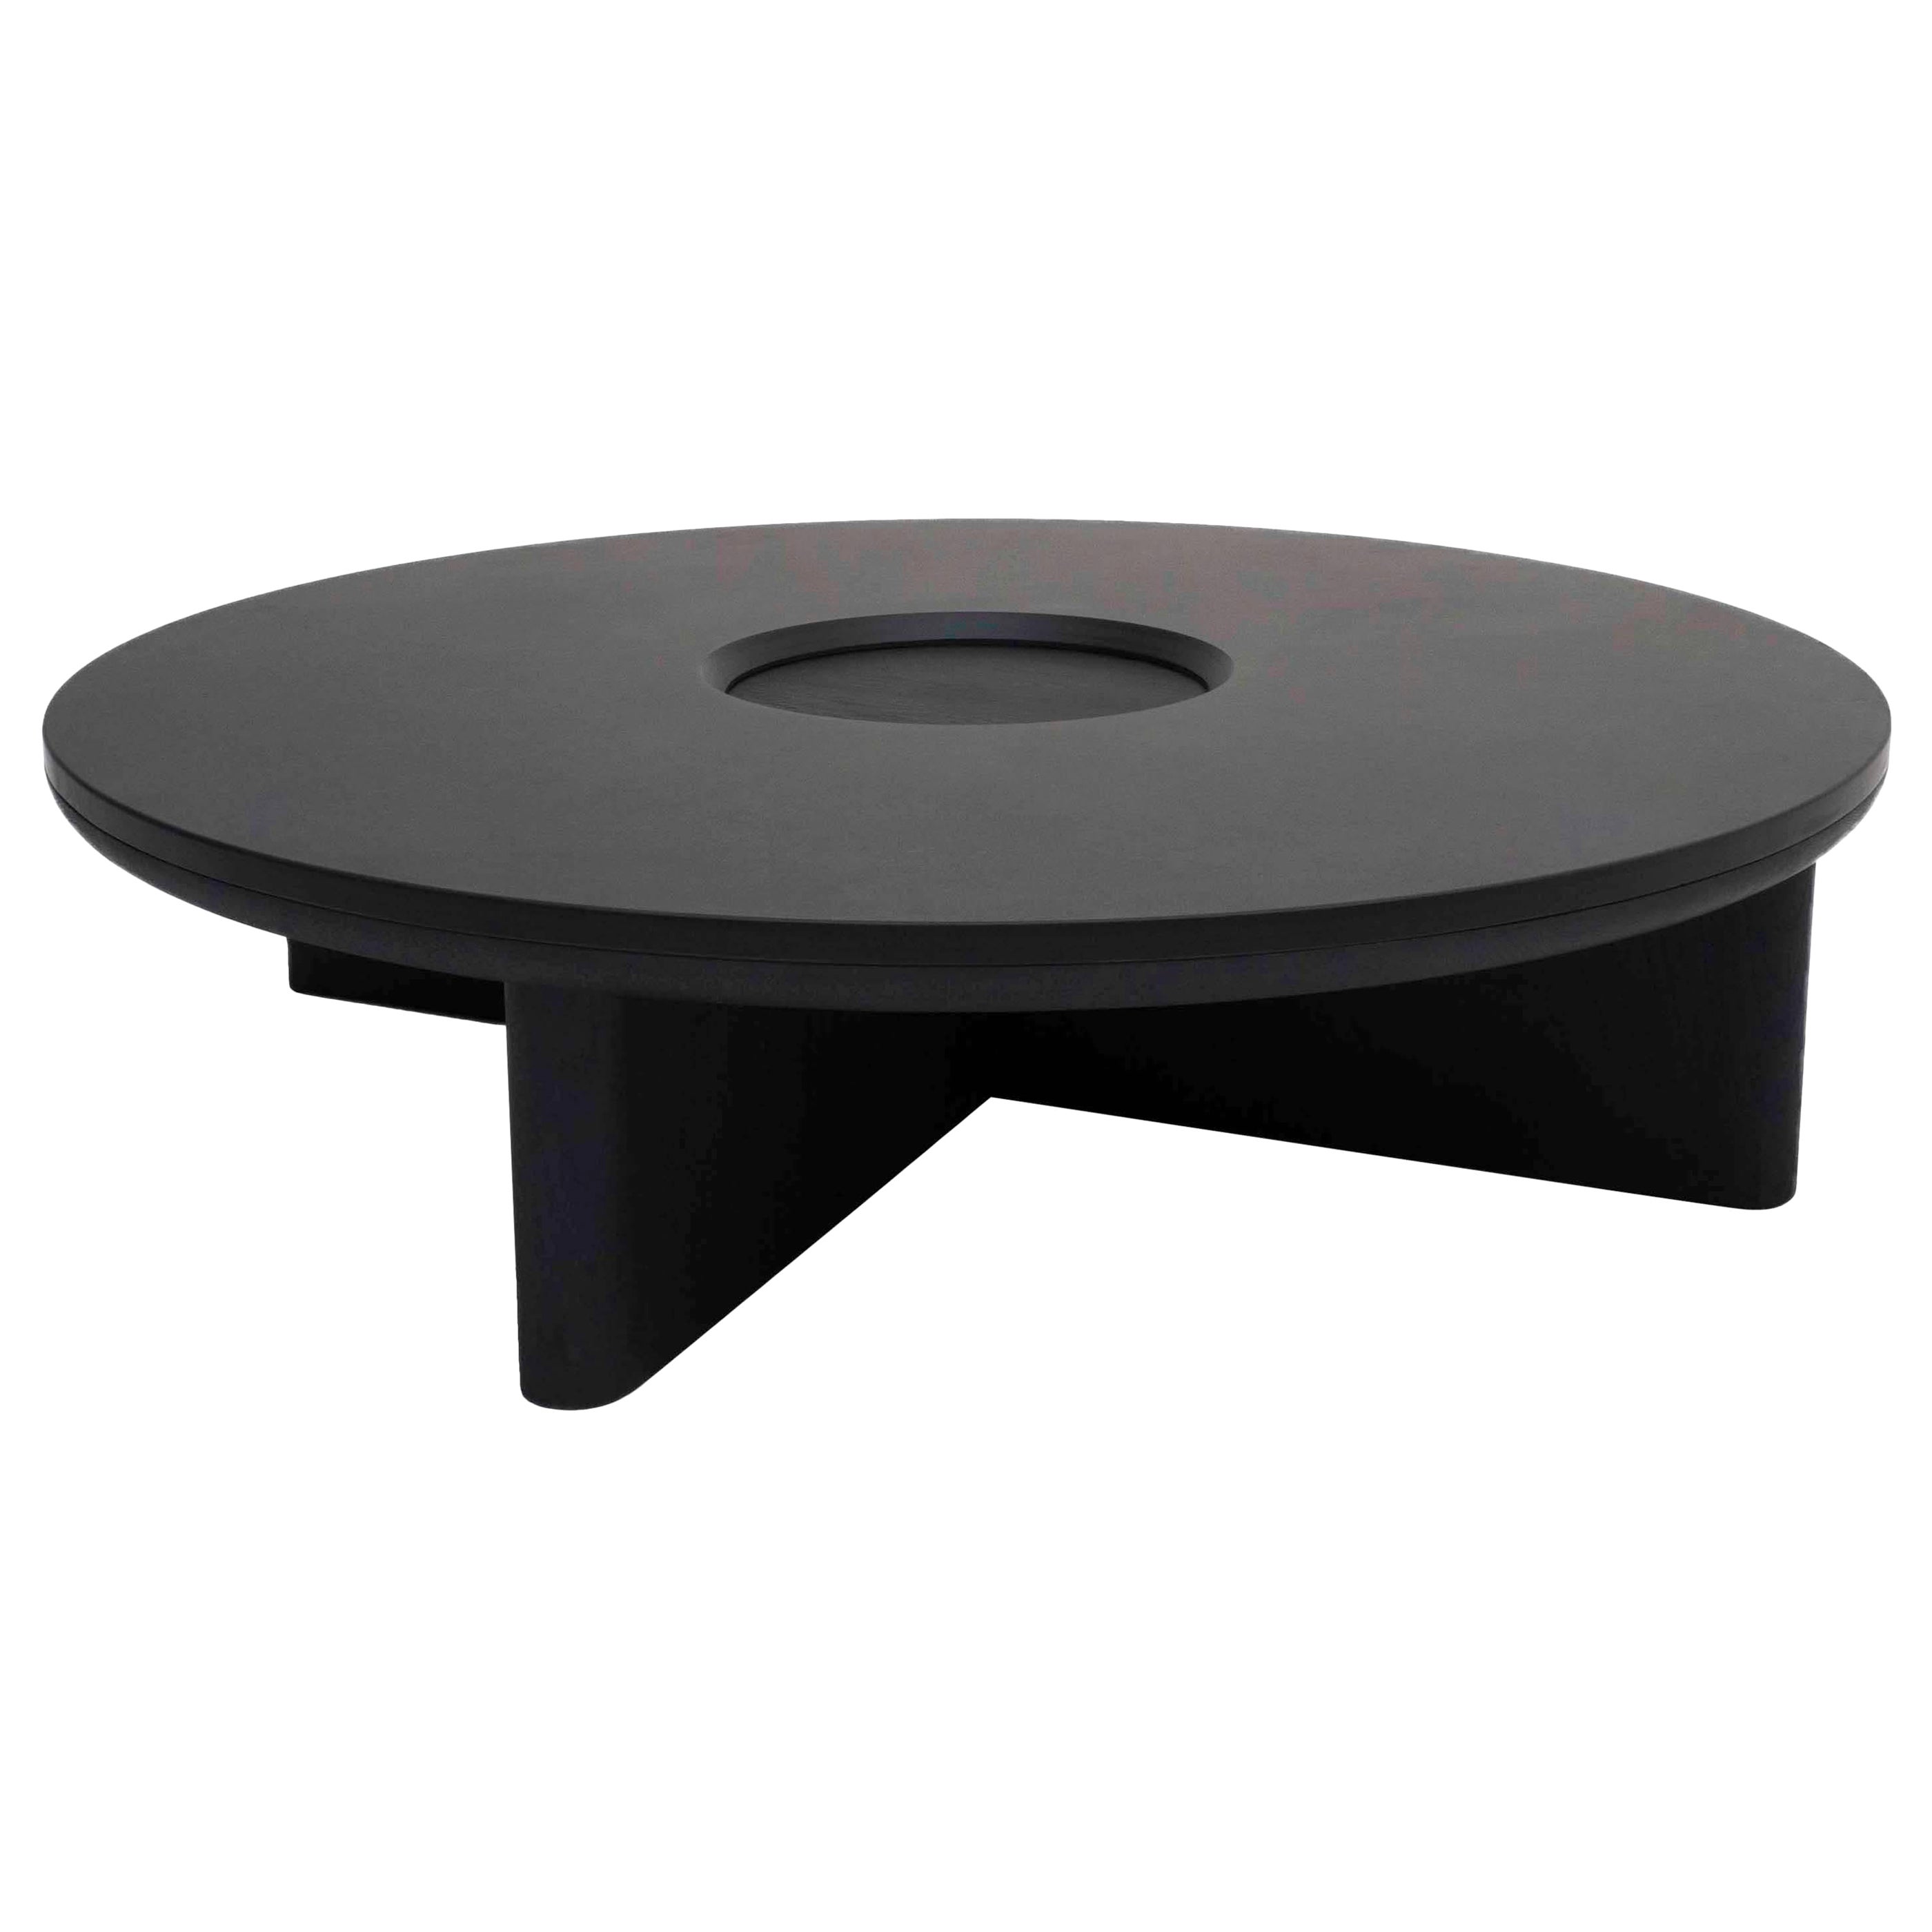 Focus, Solid Black Oak & Welsh Slate Large Coffee Table by Made in Ratio